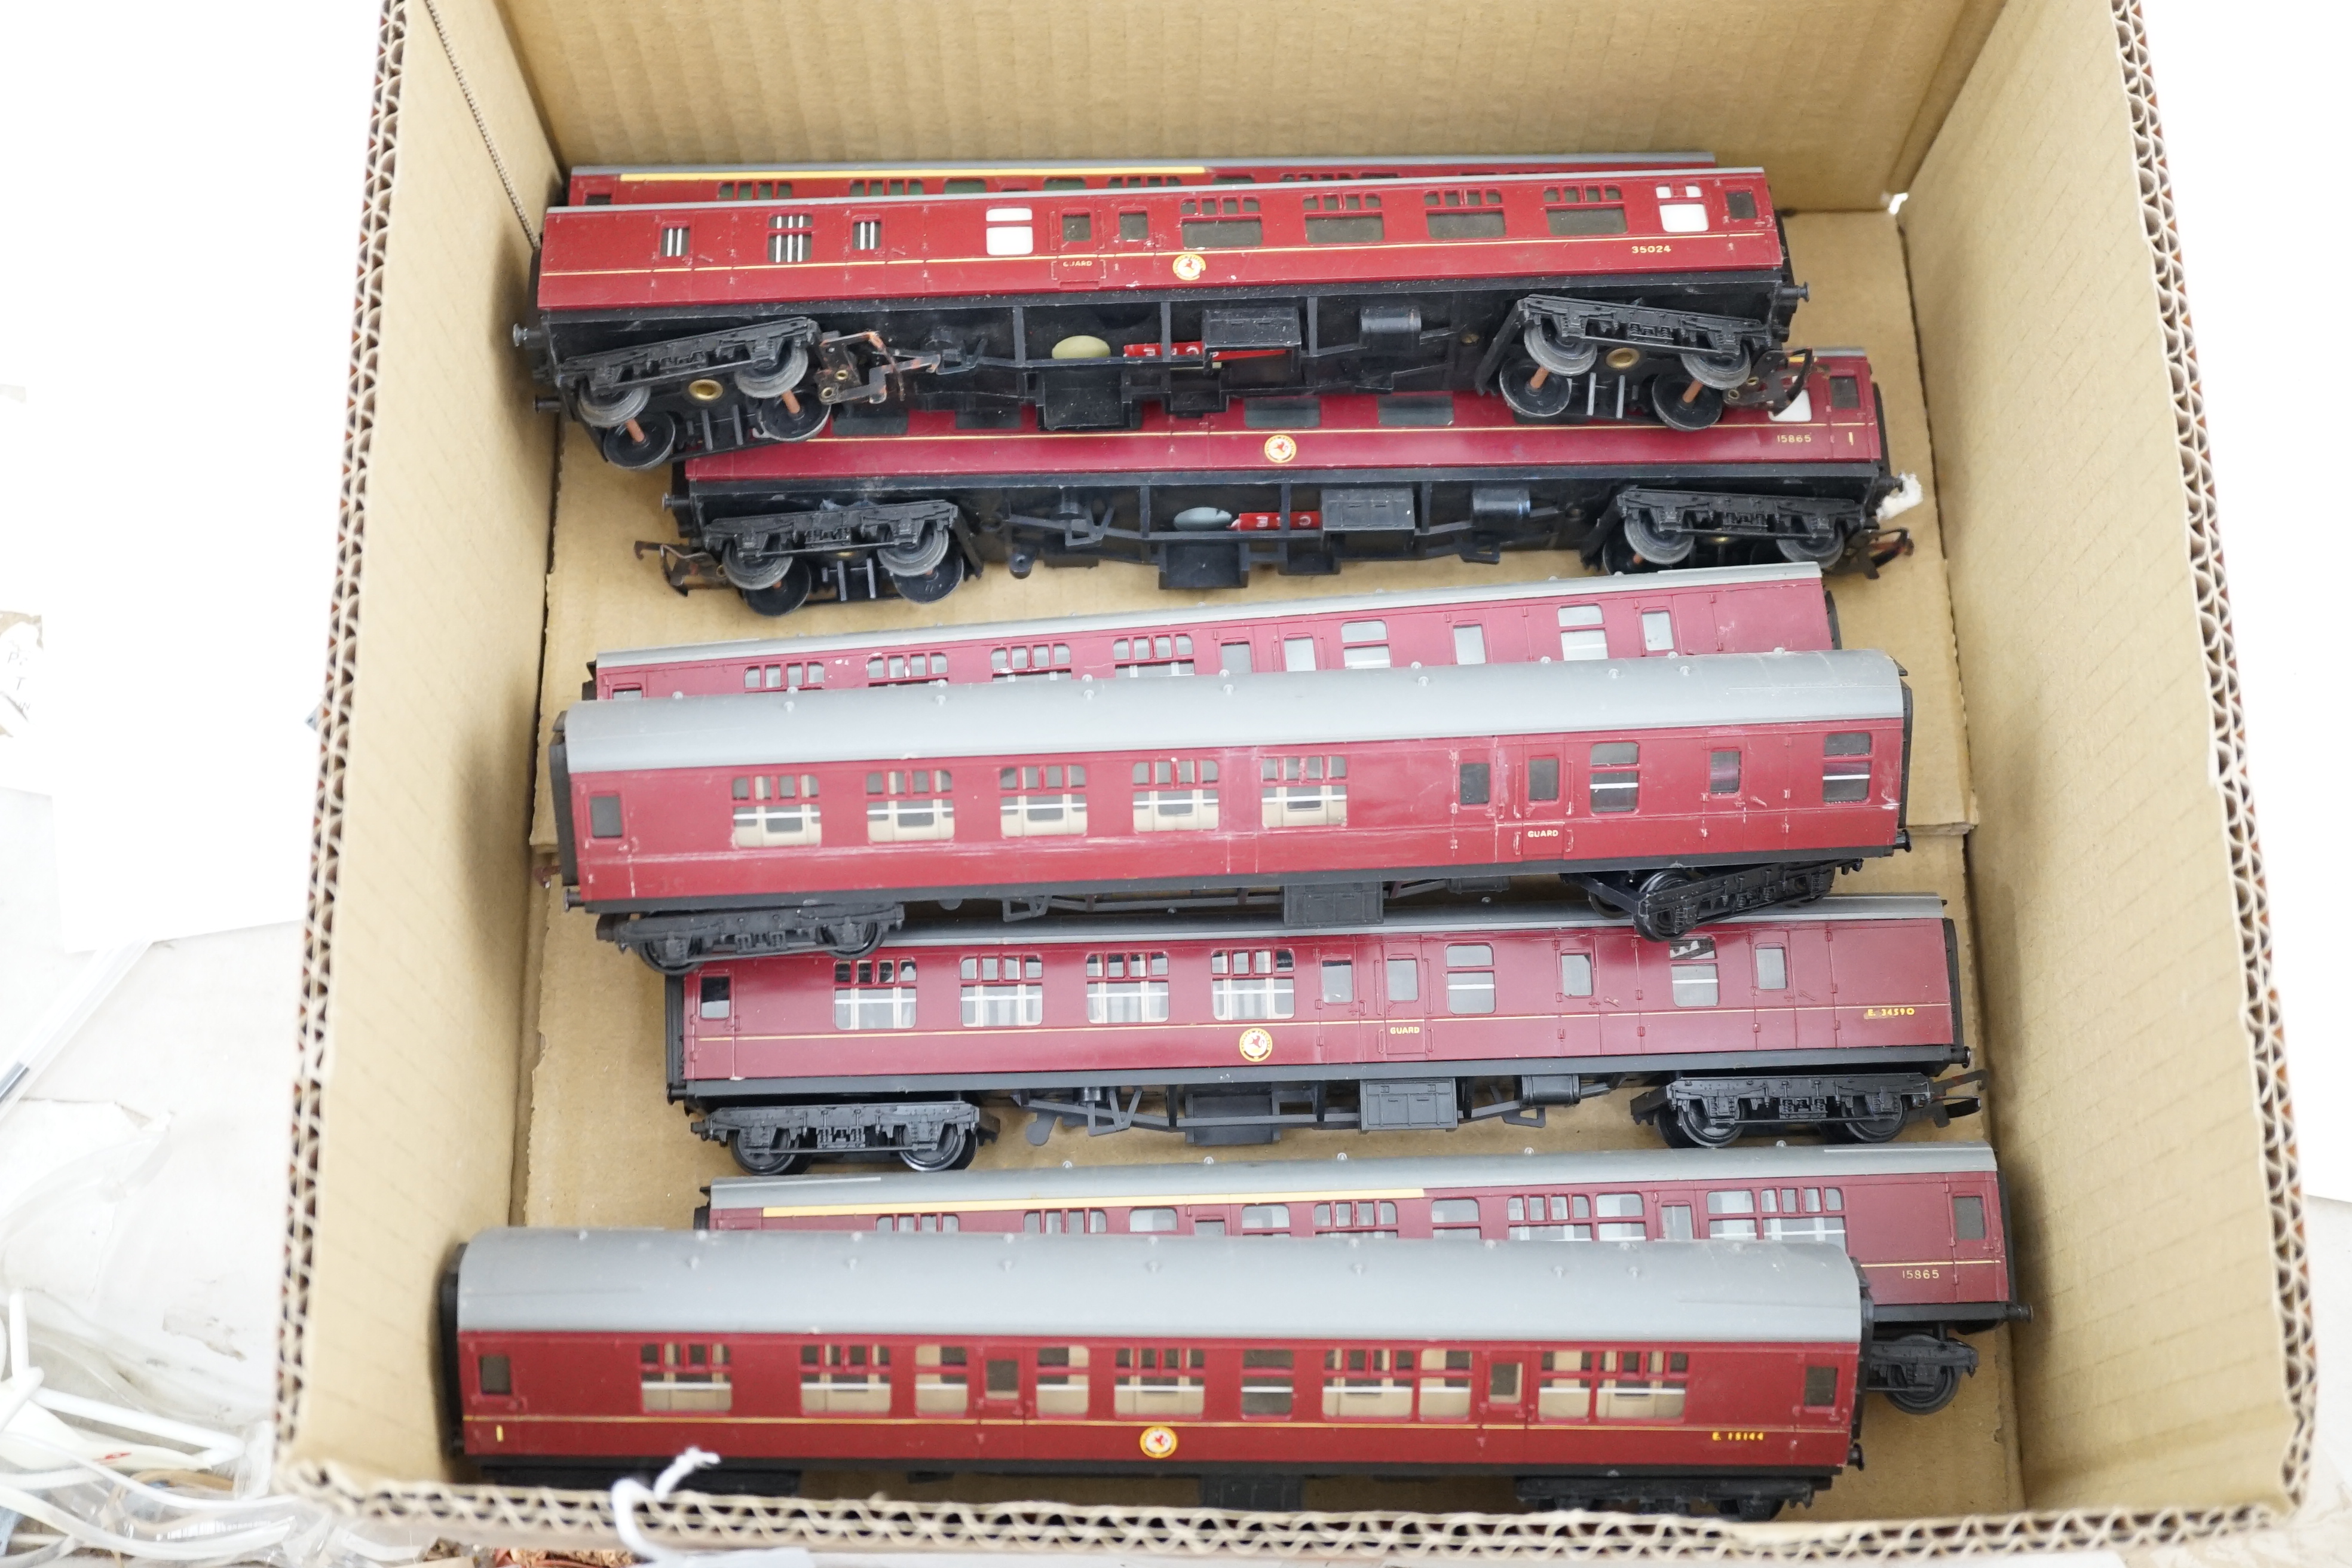 A collection of 00 gauge model railway by Hornby, Tri-ang, etc. including two boxed locomotives; a Tri-ang Wrenn LNER Class A4, Sir Nigel Gresley, (W2212), a Hornby Dublo BR Class 8F, 48073, (2224), plus an unboxed diese